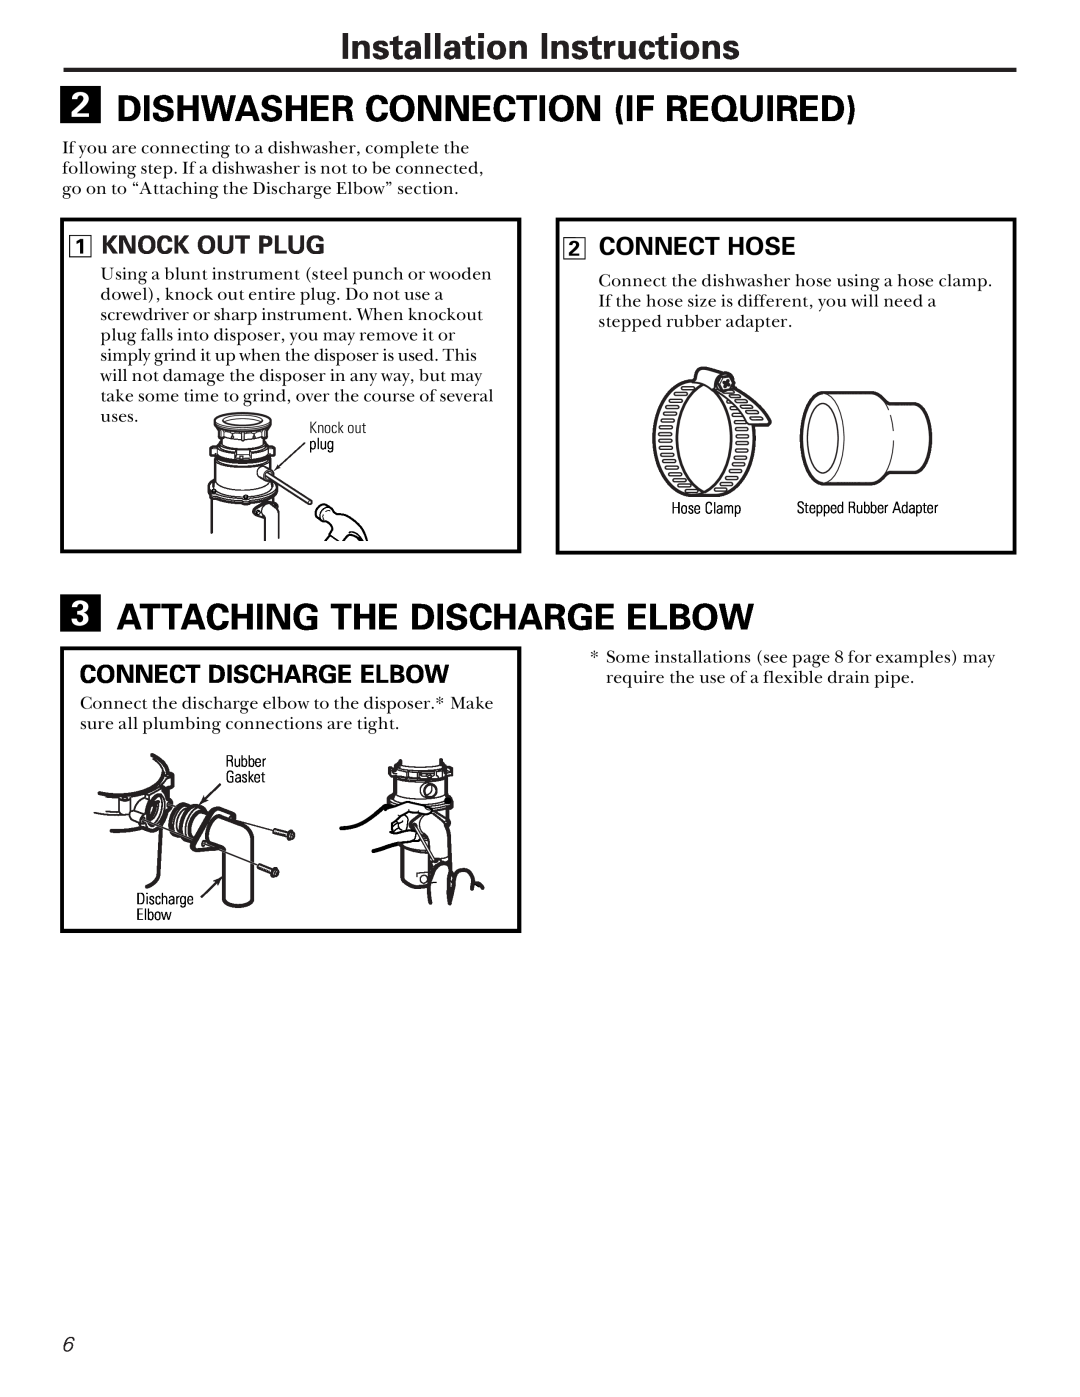 GE GFC300F Installation Instructions 2 DISHWASHER CONNECTION IF REQUIRED, Attaching The Discharge Elbow, Knock Out Plug 